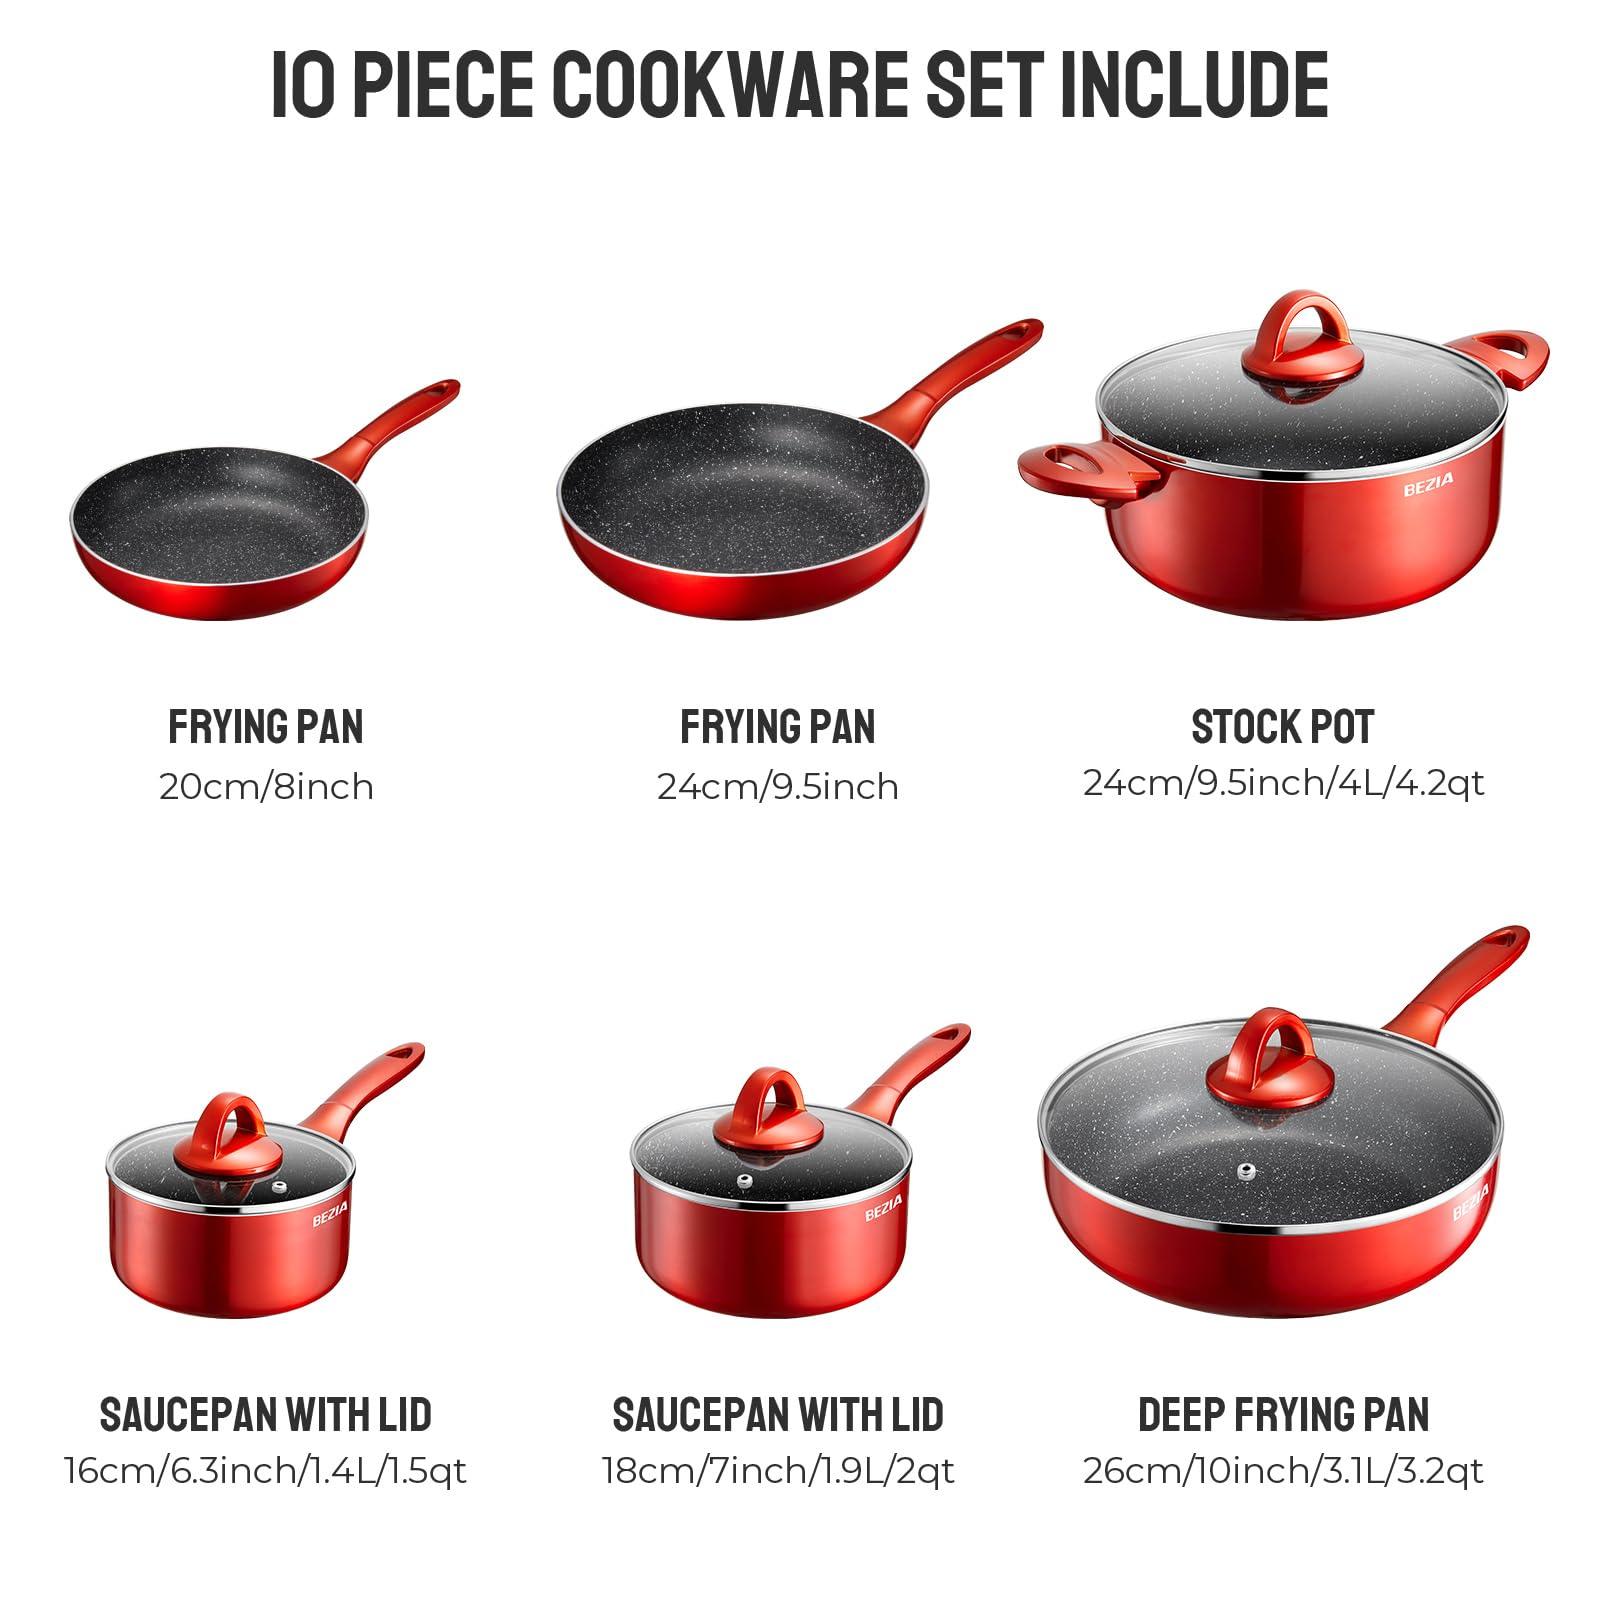 Induction Cookware Pots and Pans Set 10 Piece, BEZIA Dishwasher Safe Nonstick Cooking Pans Sets, Stay-Cool Bakelite Handle, Scratch Resistant Kitchen Sets with Frying Pans, Saucepans & Stockpot - CookCave